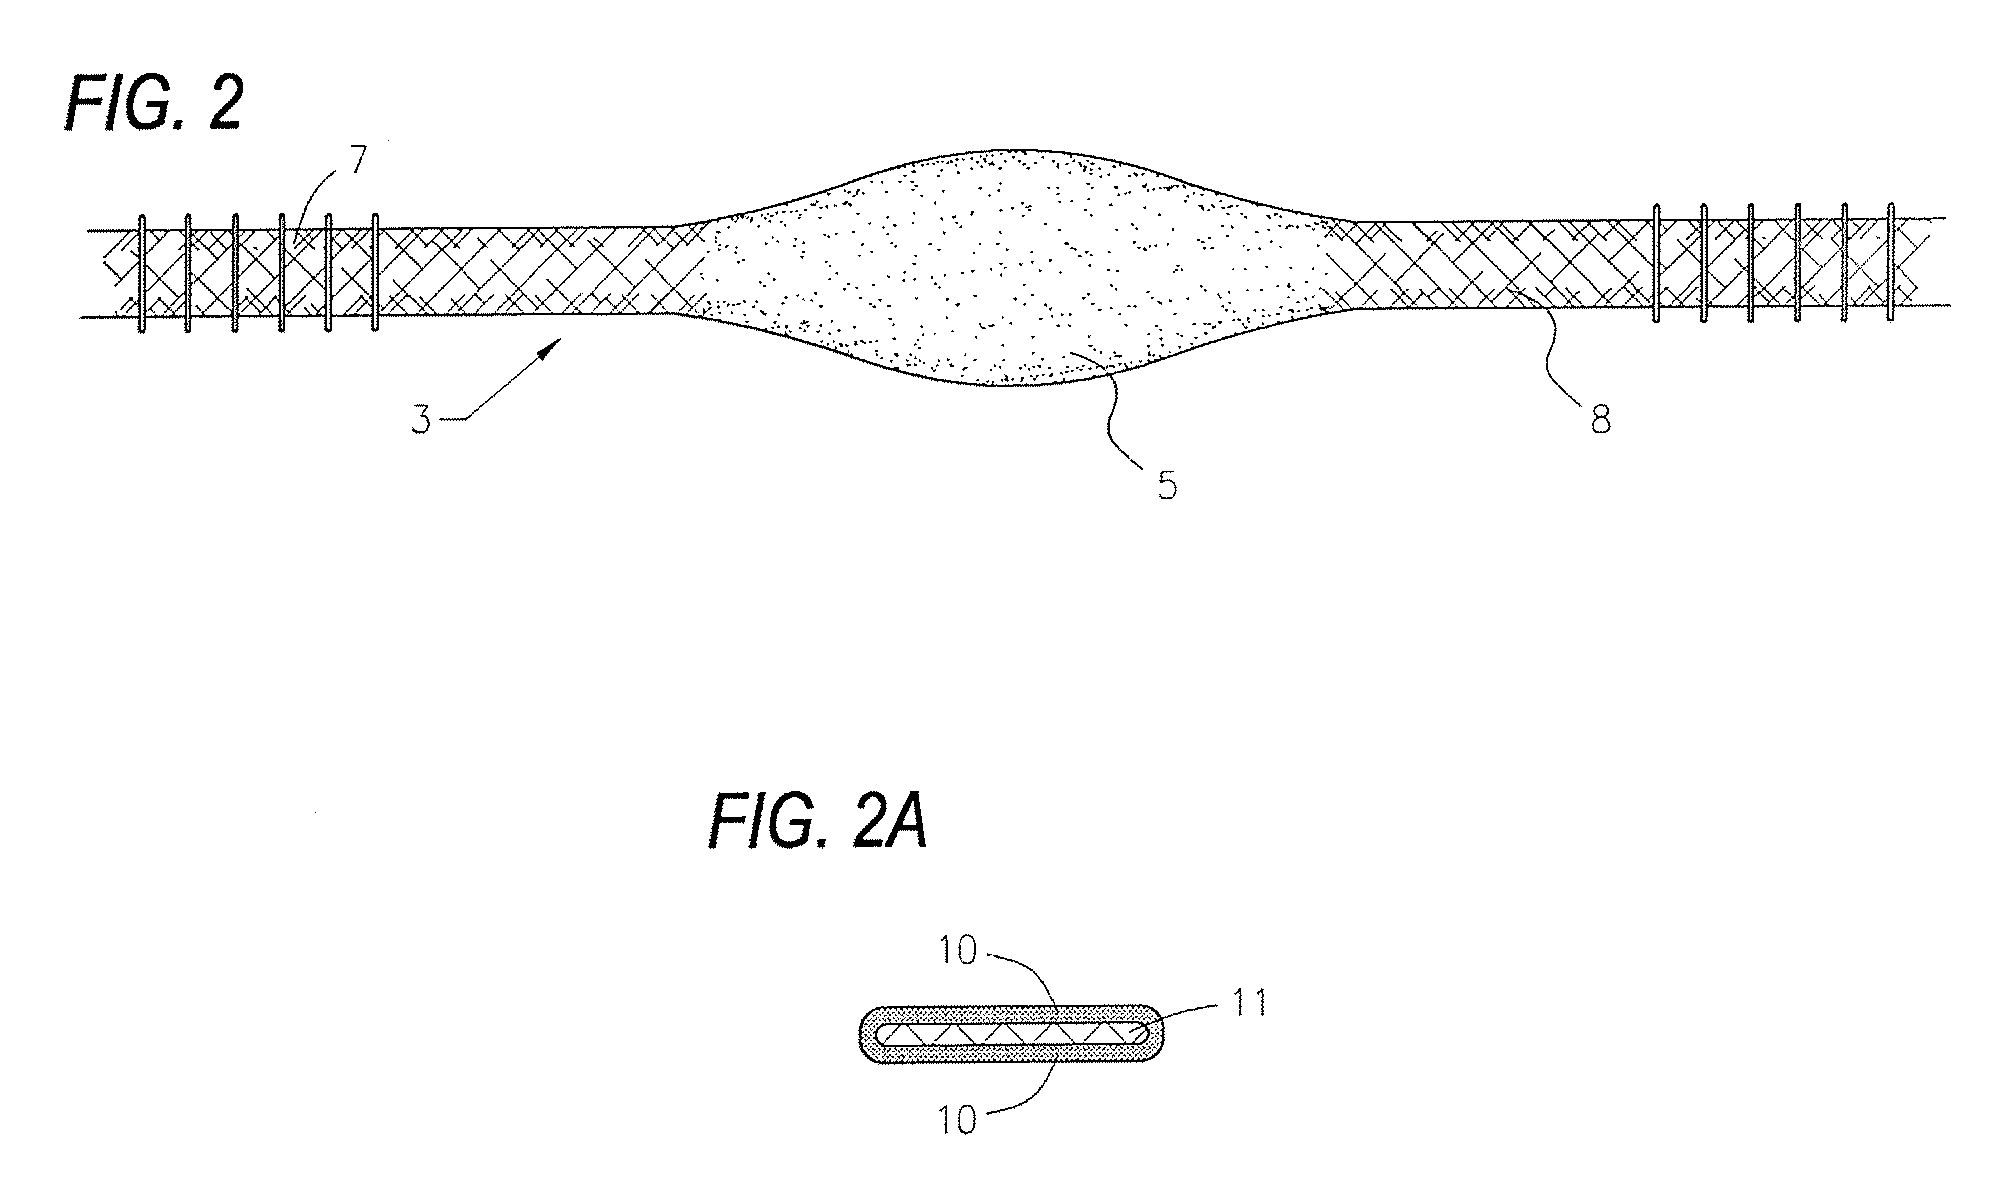 Surgical instrument for treating female urinary stress incontinence